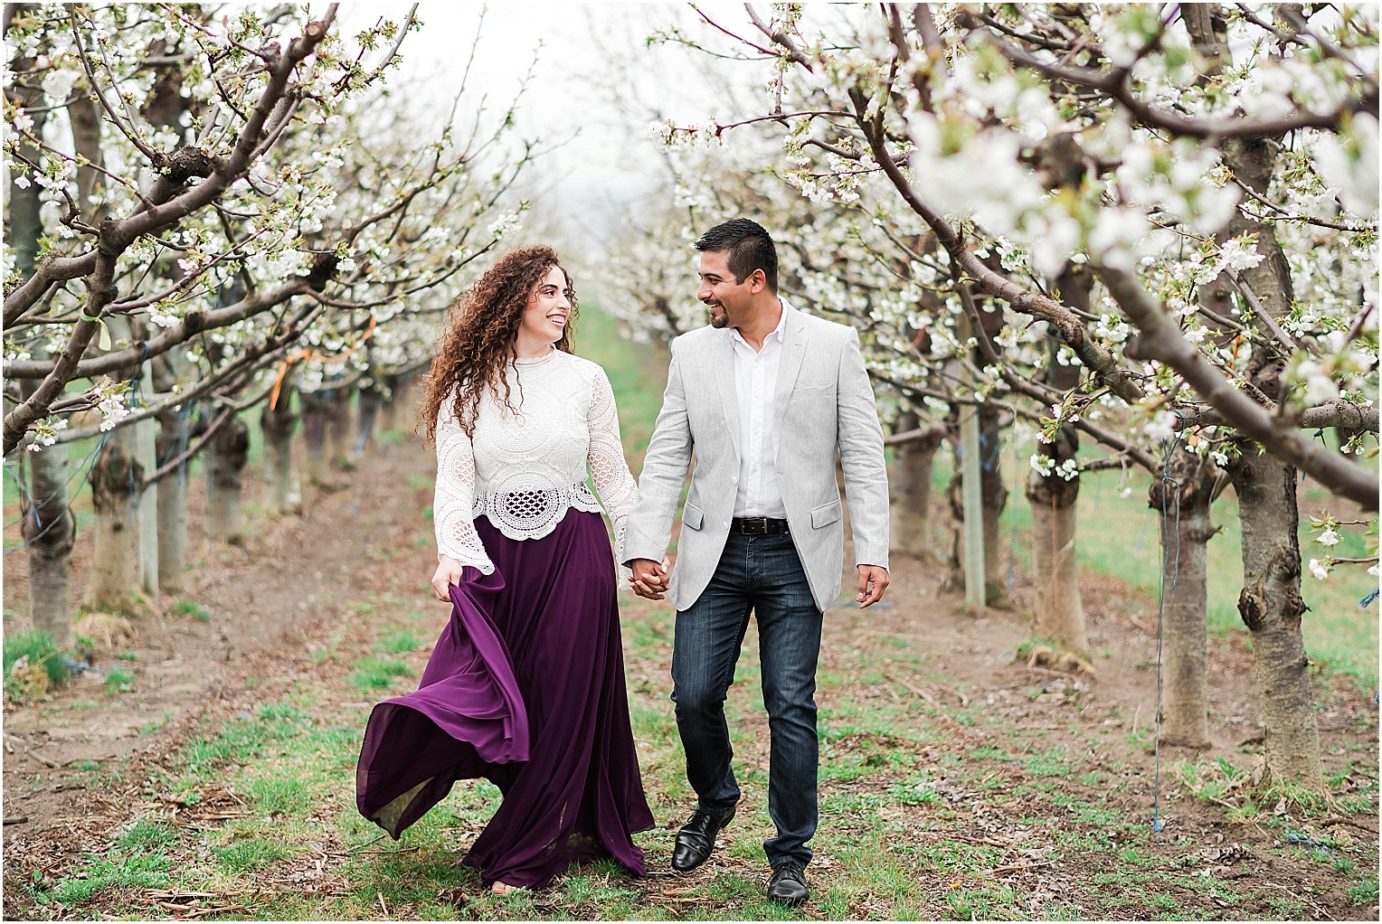 Favorite engagement photos of 2018 Misty C Photography Blog cherry blossom session